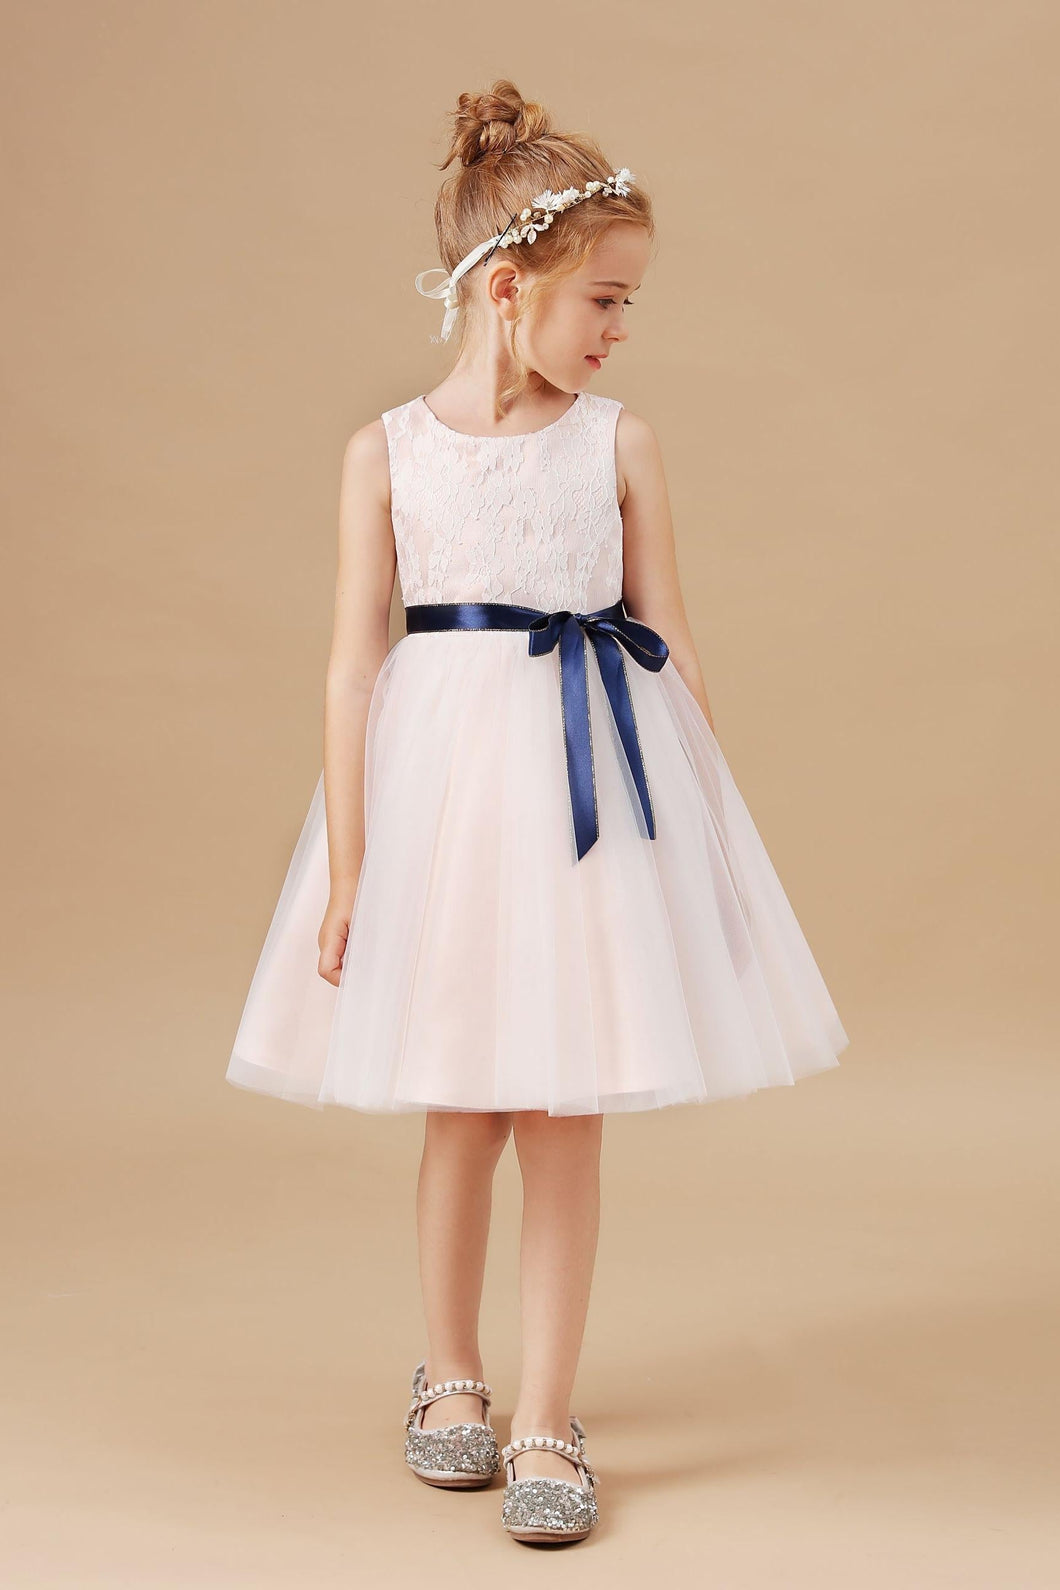 Tulle Satin Lace Flower Girl dress With Bowknot Satin-Sash